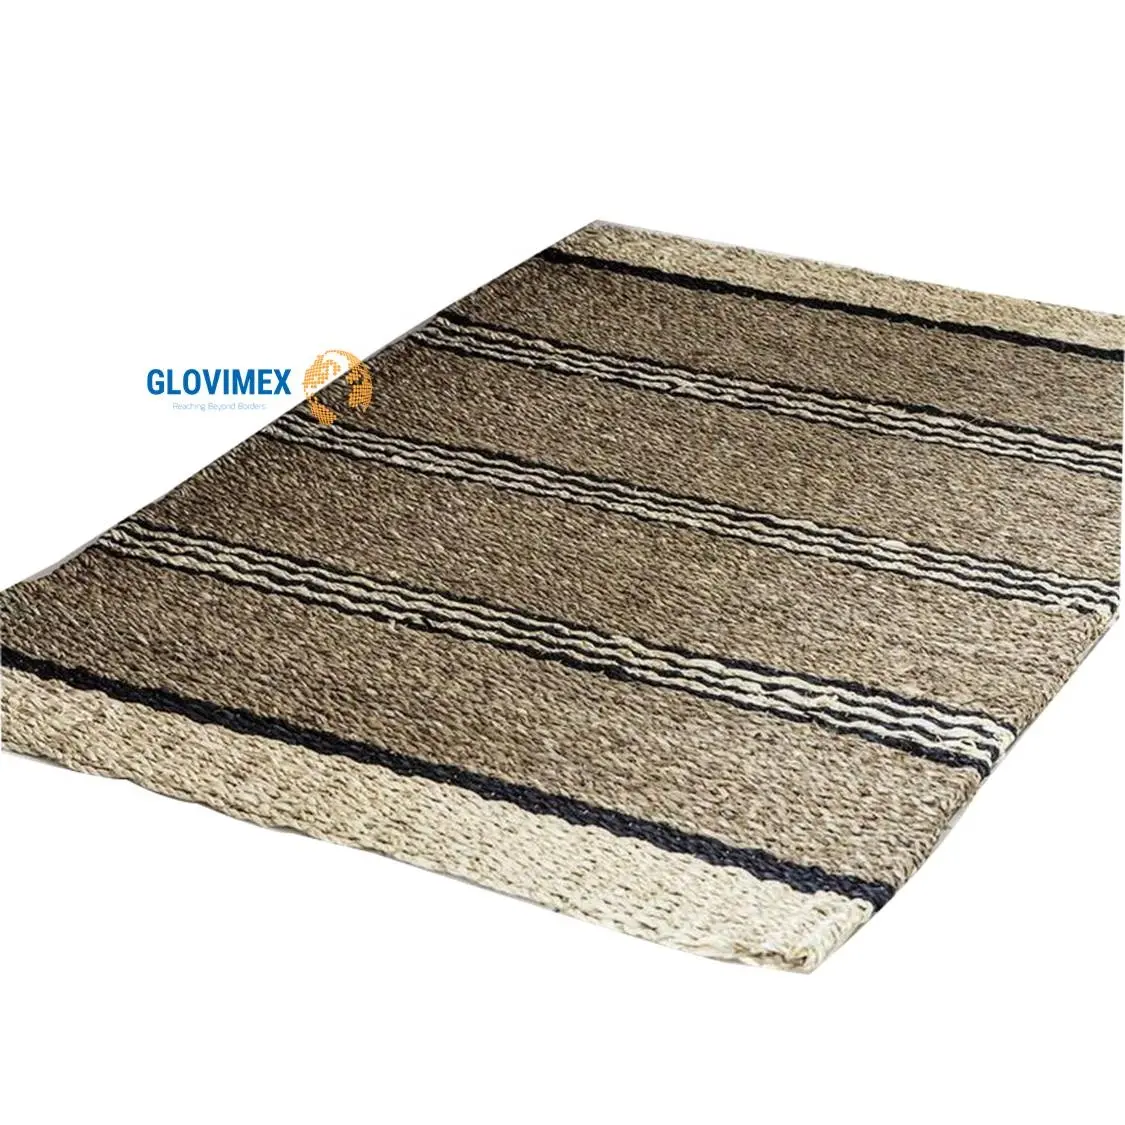 Mosque Floor Bathmat Seagrass Rug For Yoga Christmas Collection In Vietnam